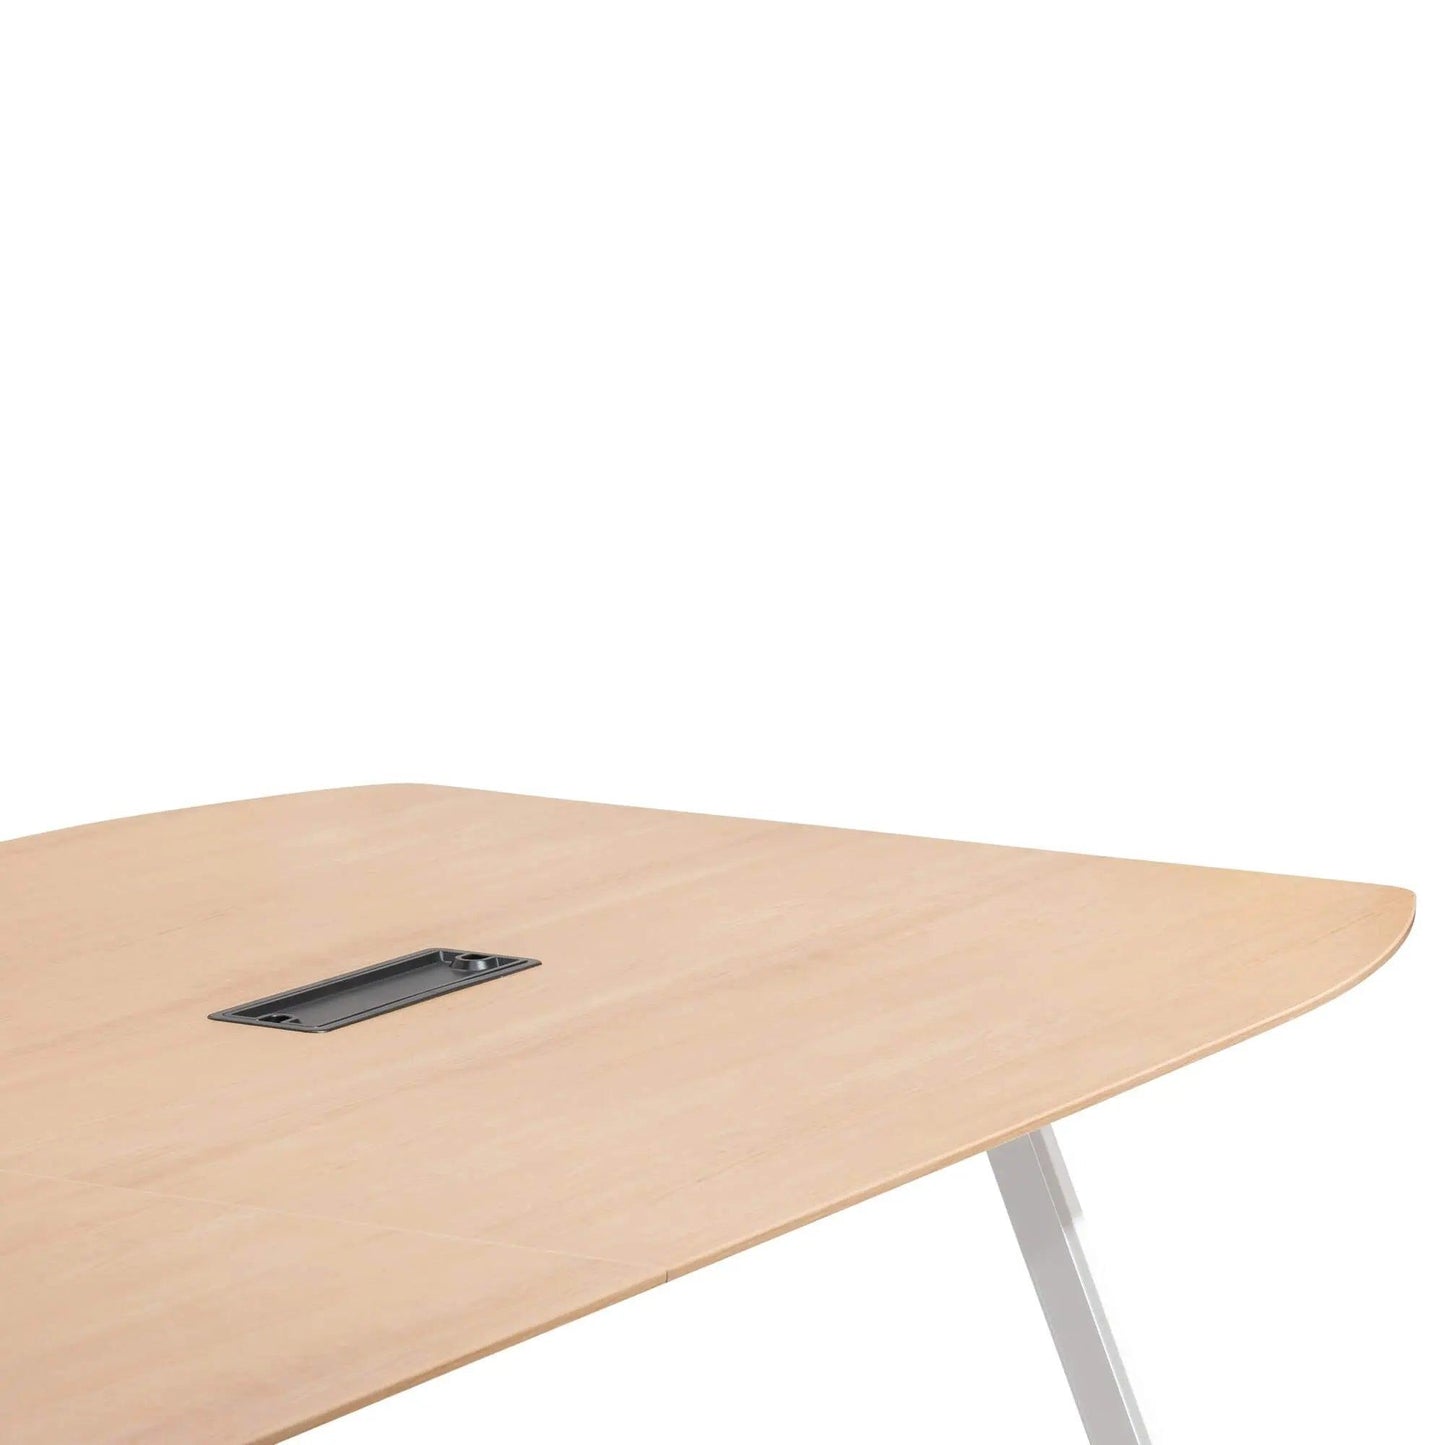 Calibre Boardroom Meeting Table - Natural OT2500-SN - Office DesksOT2500-SN 5